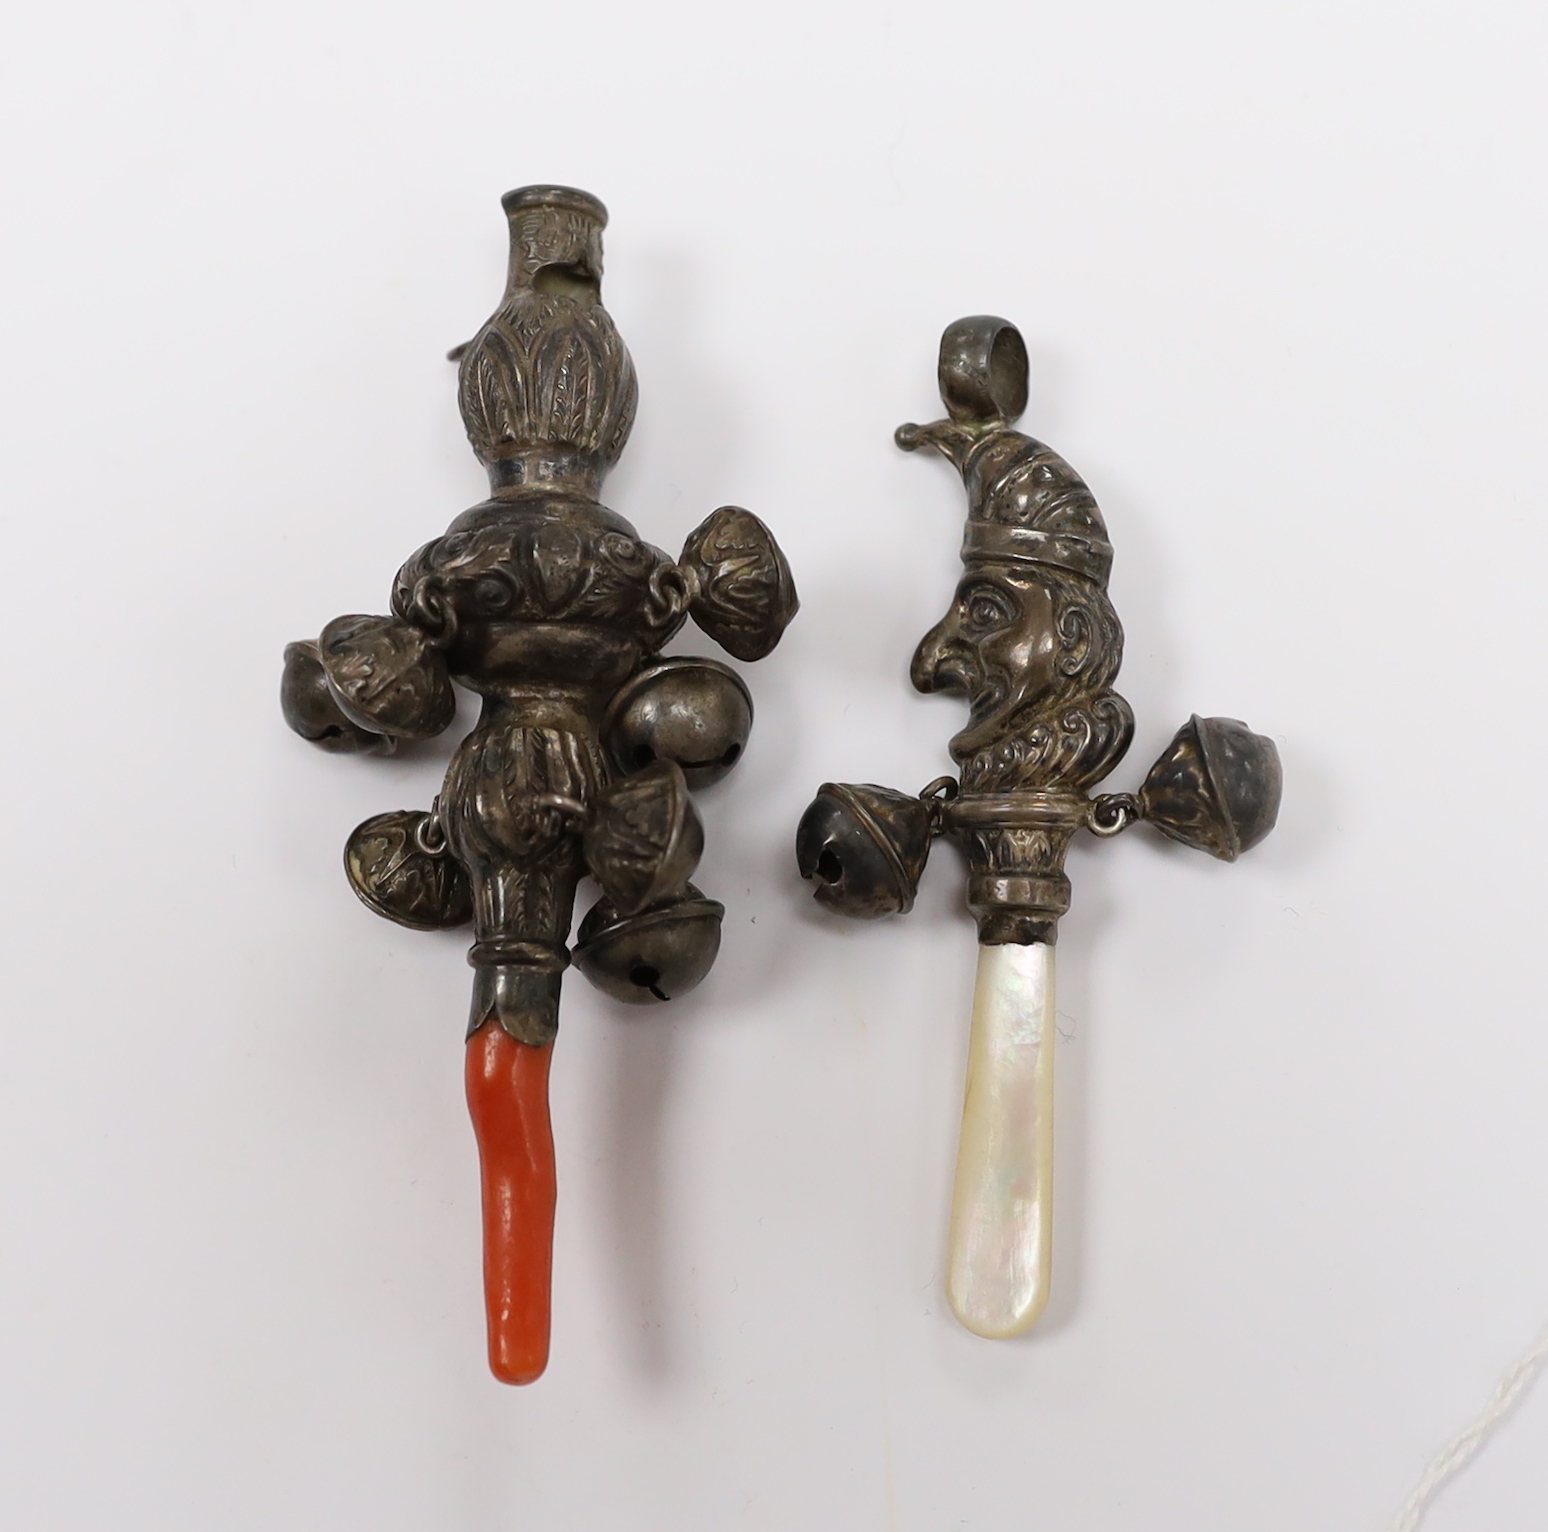 Two child's silver rattles, including George V Mr Punch, with mother of pearl teether, by Crisford & Norris, 86mm.